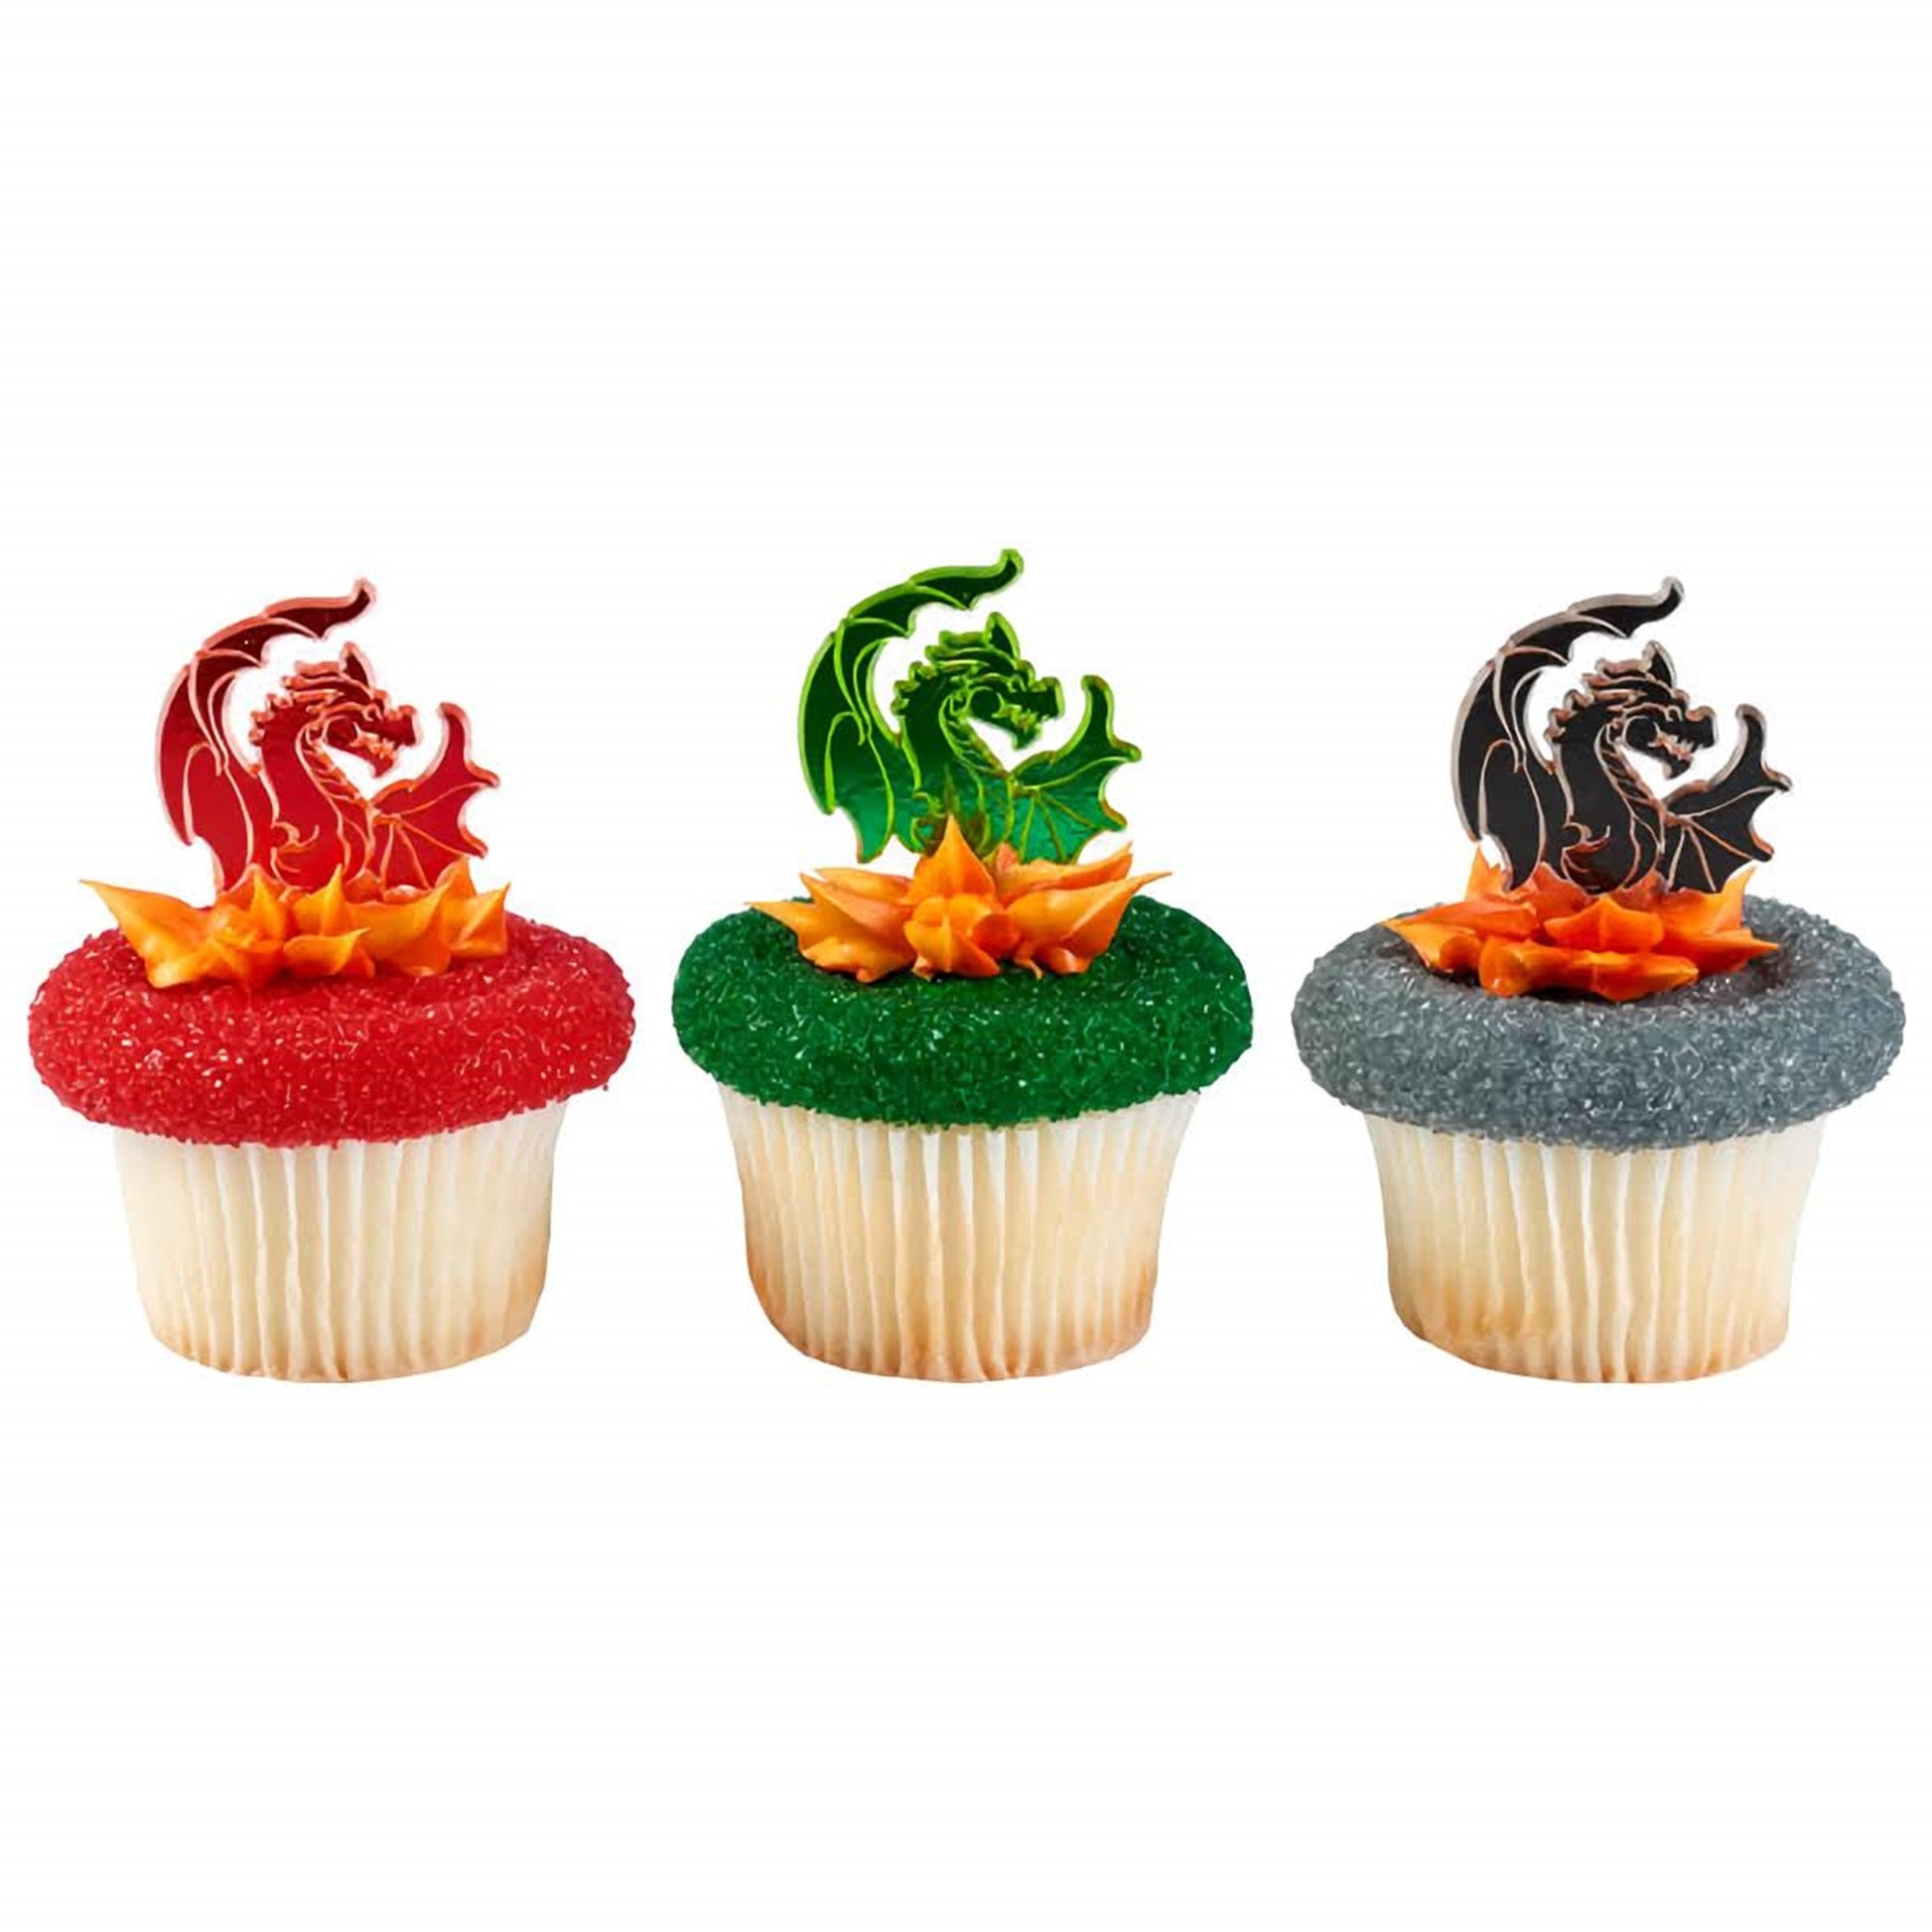 A trio of dragon cupcake toppers in red, green, and black, positioned on fire-like orange icing, designed to bring a mythological flair to any cupcake arrangement.